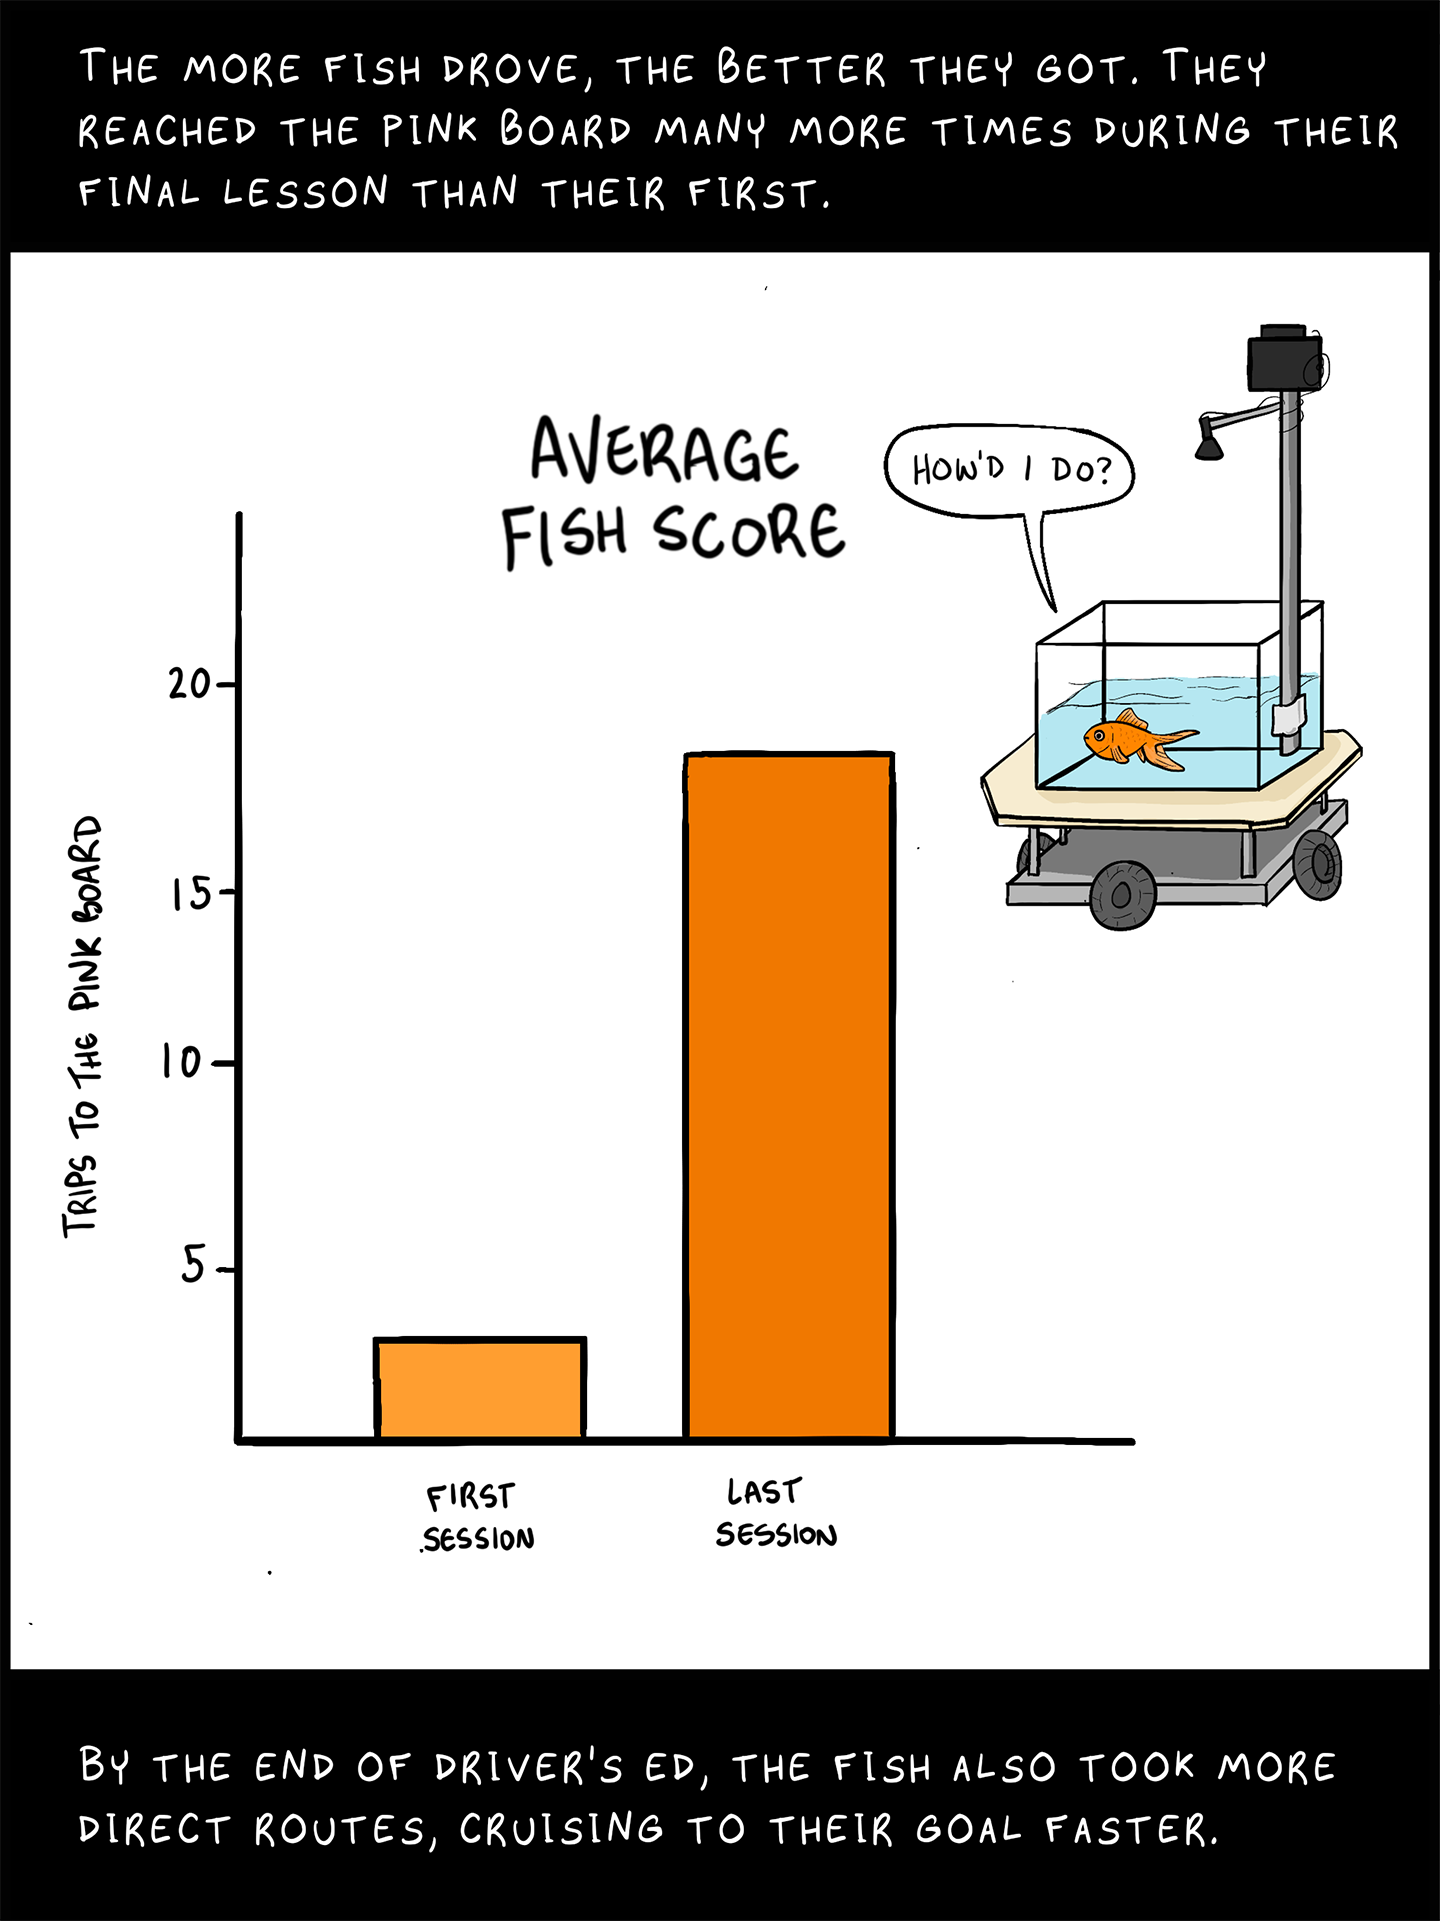 Image: A graph showing how the fishes improved over time. In the upper right corner the fish is in the tank on wheels. [Fish speech bubble: How’d I do?]

Image text (top): The more fish drove, the better they got. They reached the pink board many more times during their final lesson than their first. 

Image text (bottom): By the end of driver’s ed, the fish also took more direct routes, cruising to their goal faster.